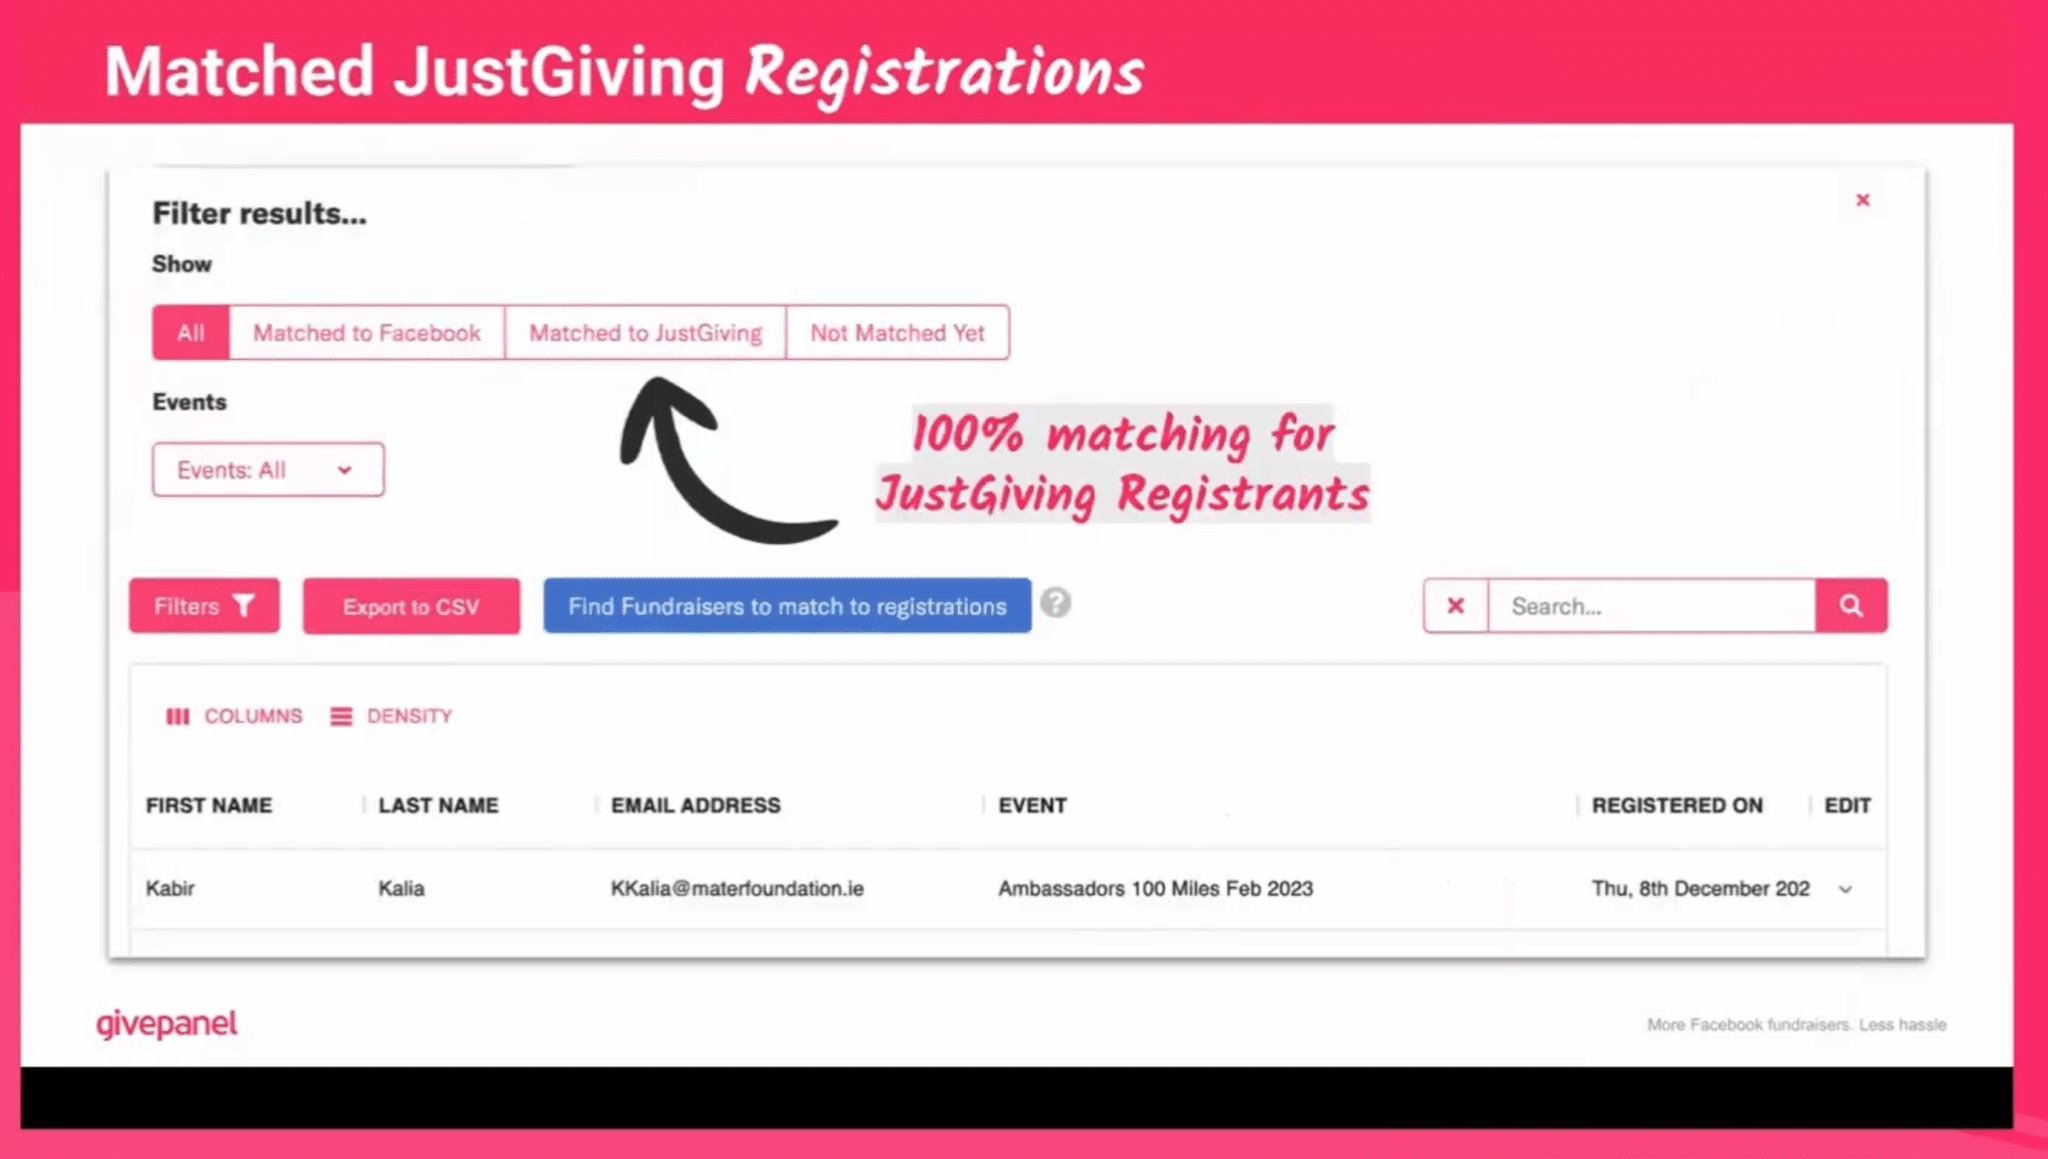 Screenshot of GivePanel interface showing Matched JustGiving Registrations